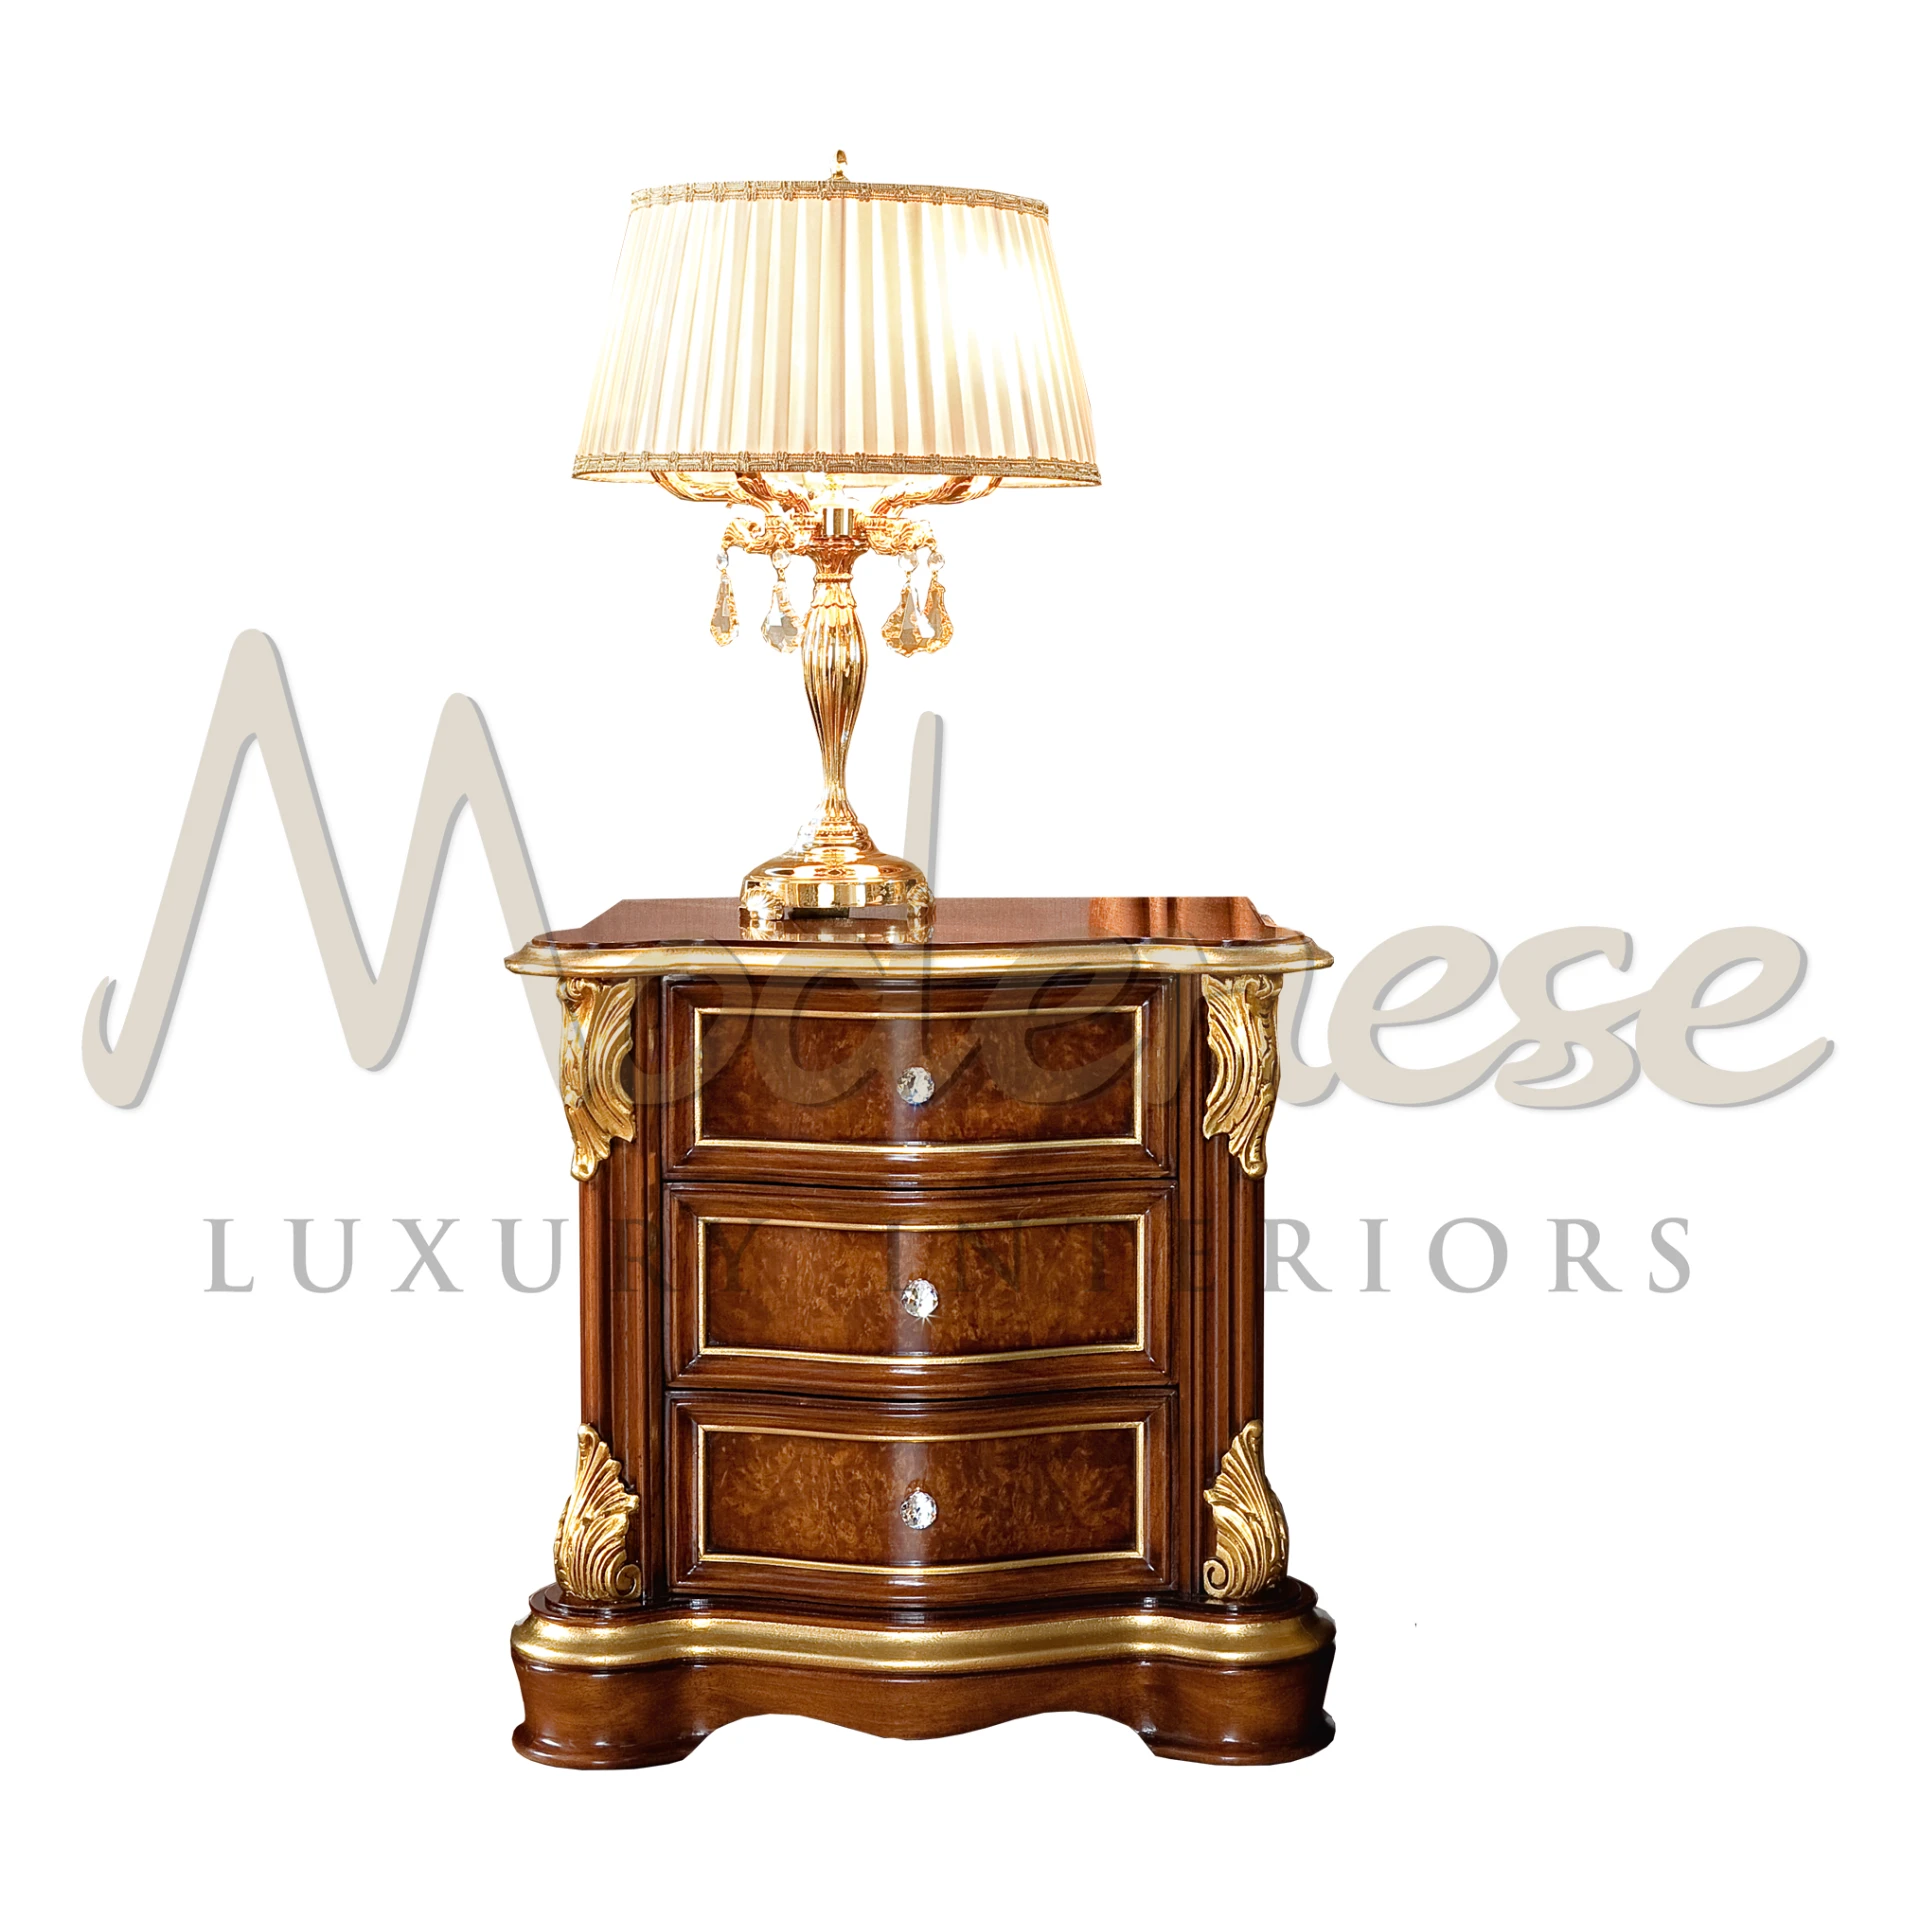 Traditional wooden nightstand with burl wood panels and ornate gold leaf accents, featuring a crystal table lamp with a pleated lampshade on top created for bedroom.